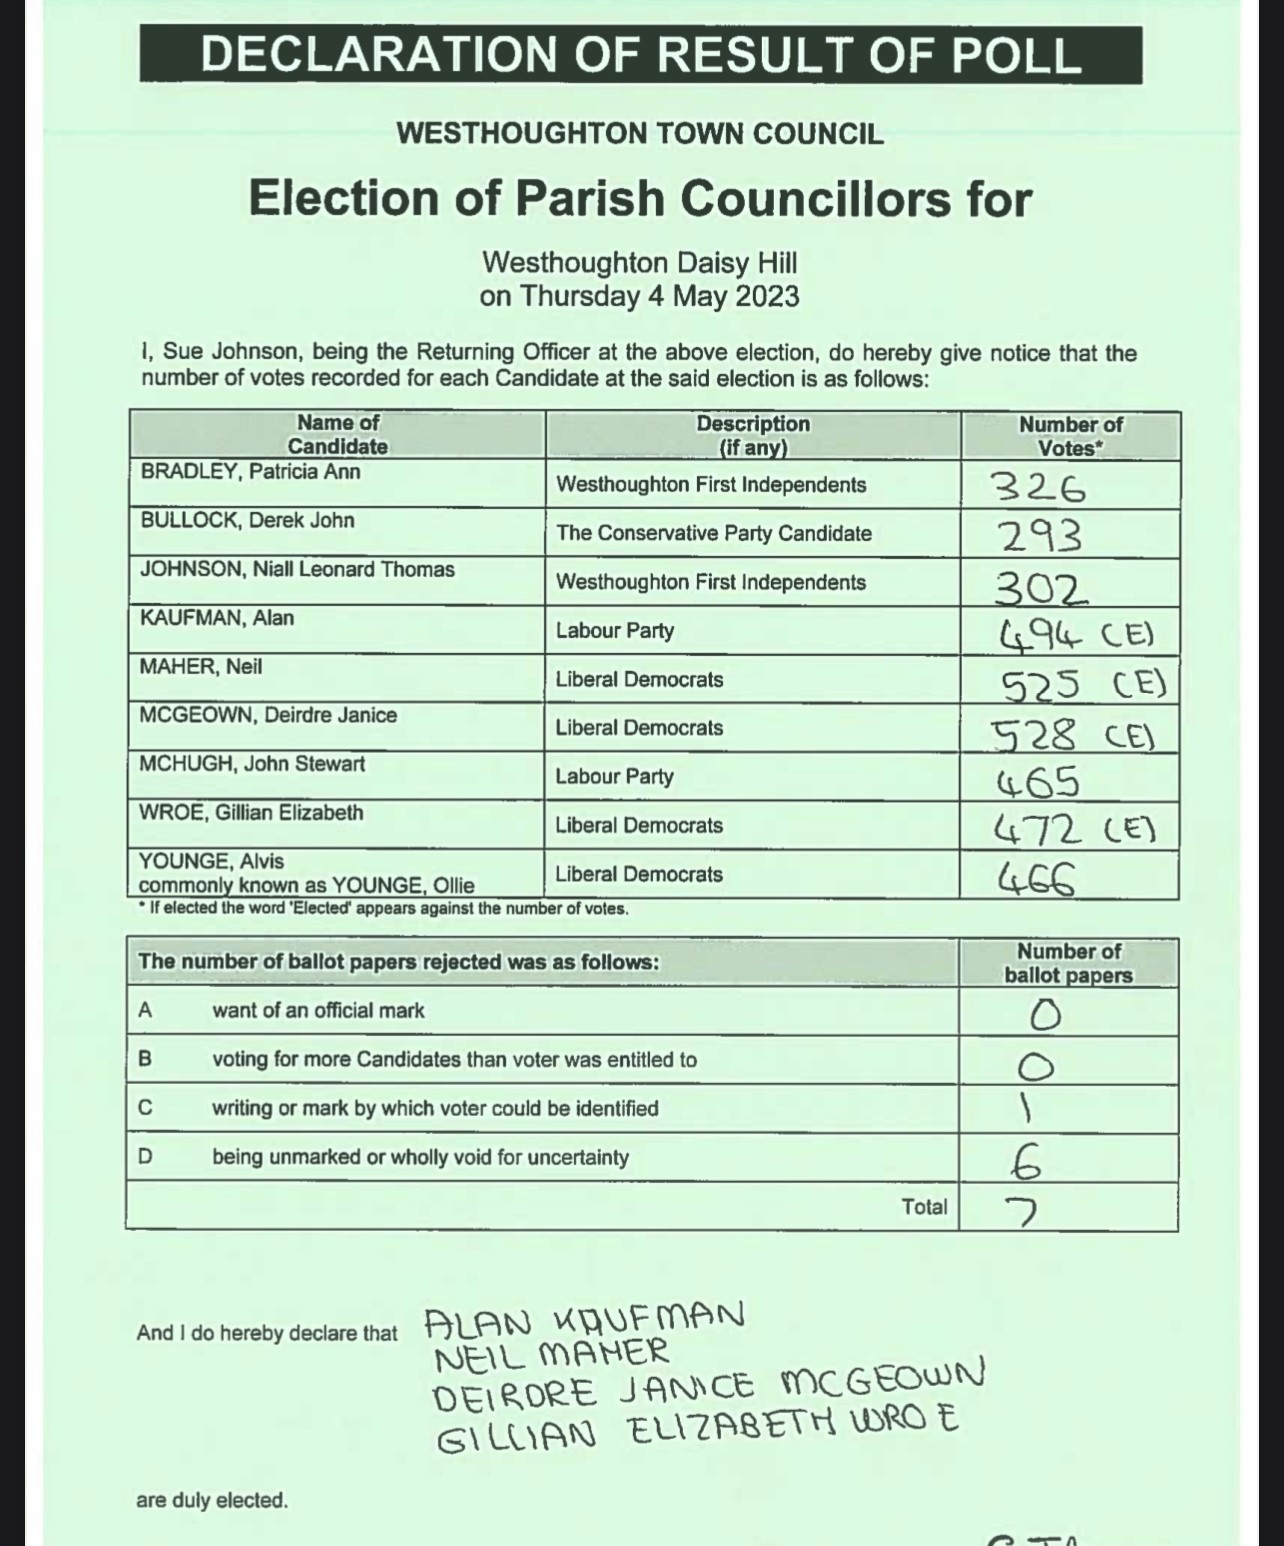 Westhoughton Daisy Hill results